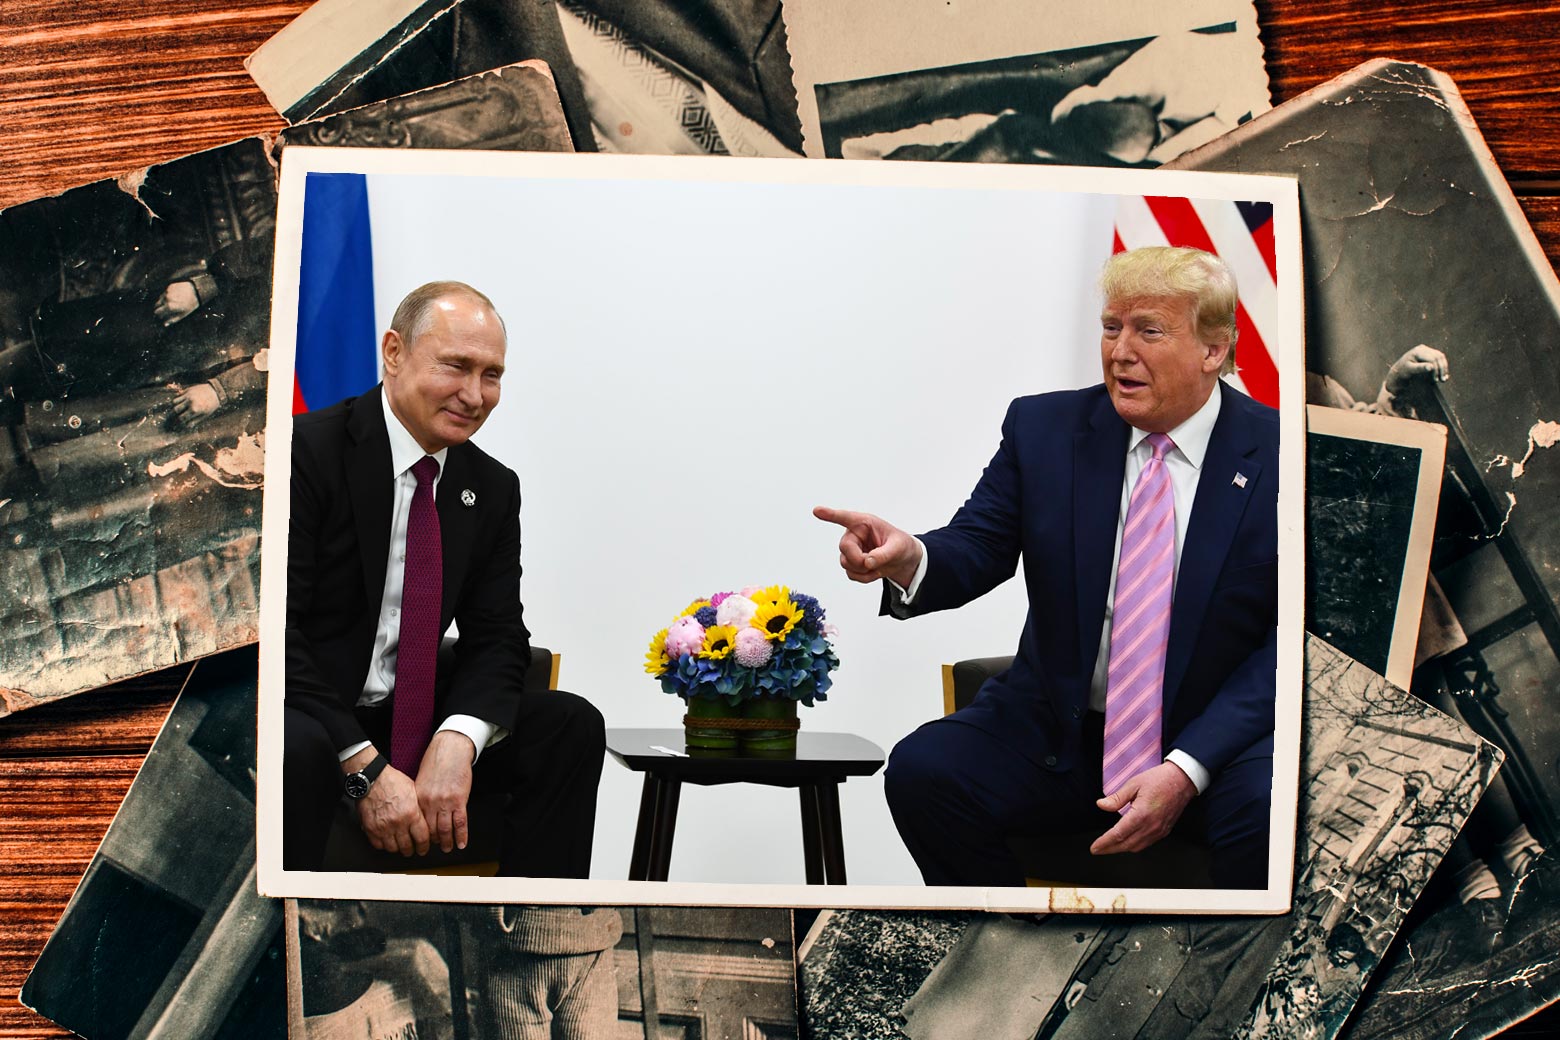 A photograph of Donald Trump meeting with Vladimir Putin on top of a pile of black-and-white photographs.